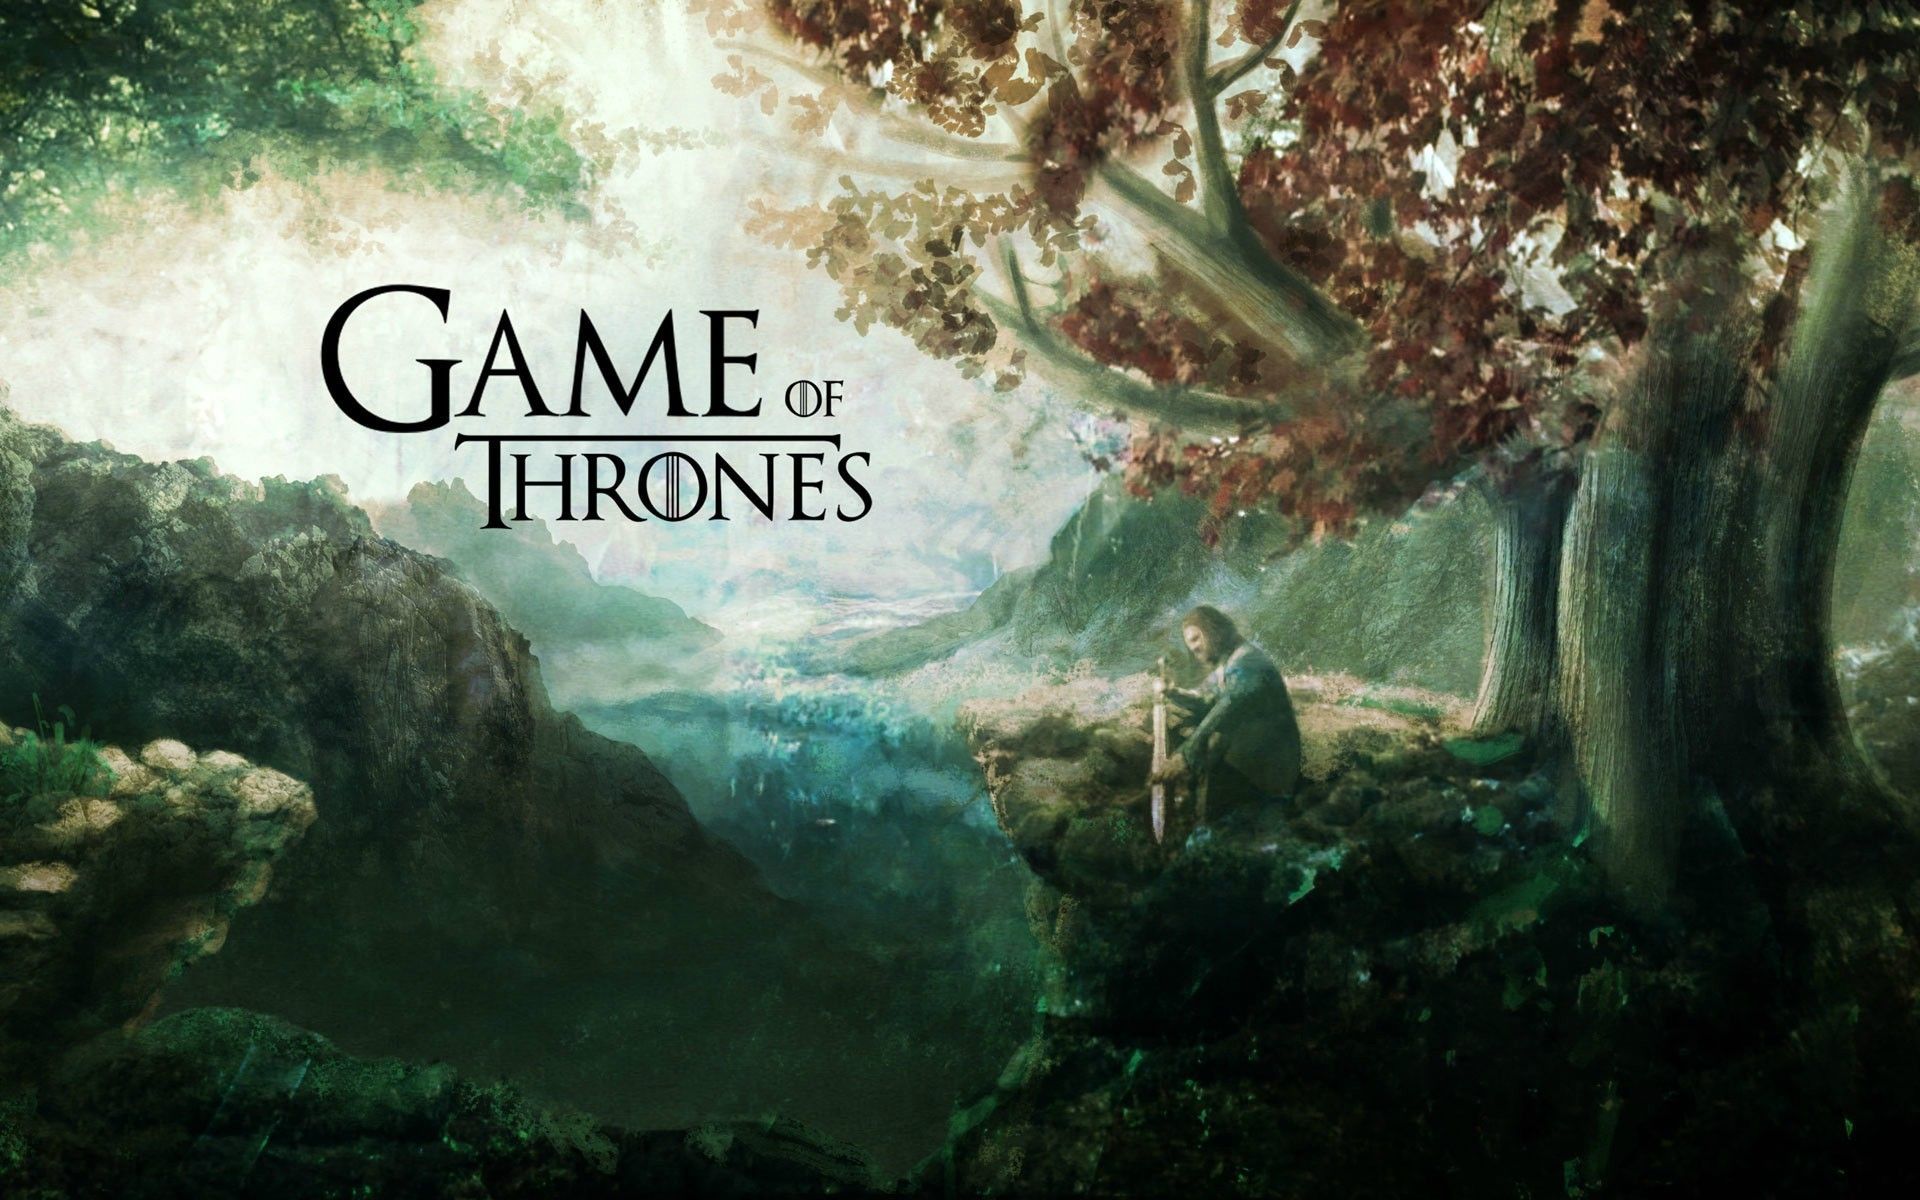 Ultra HD game of thrones poster. Game of thrones poster, Game of thrones art, Game of thrones tv